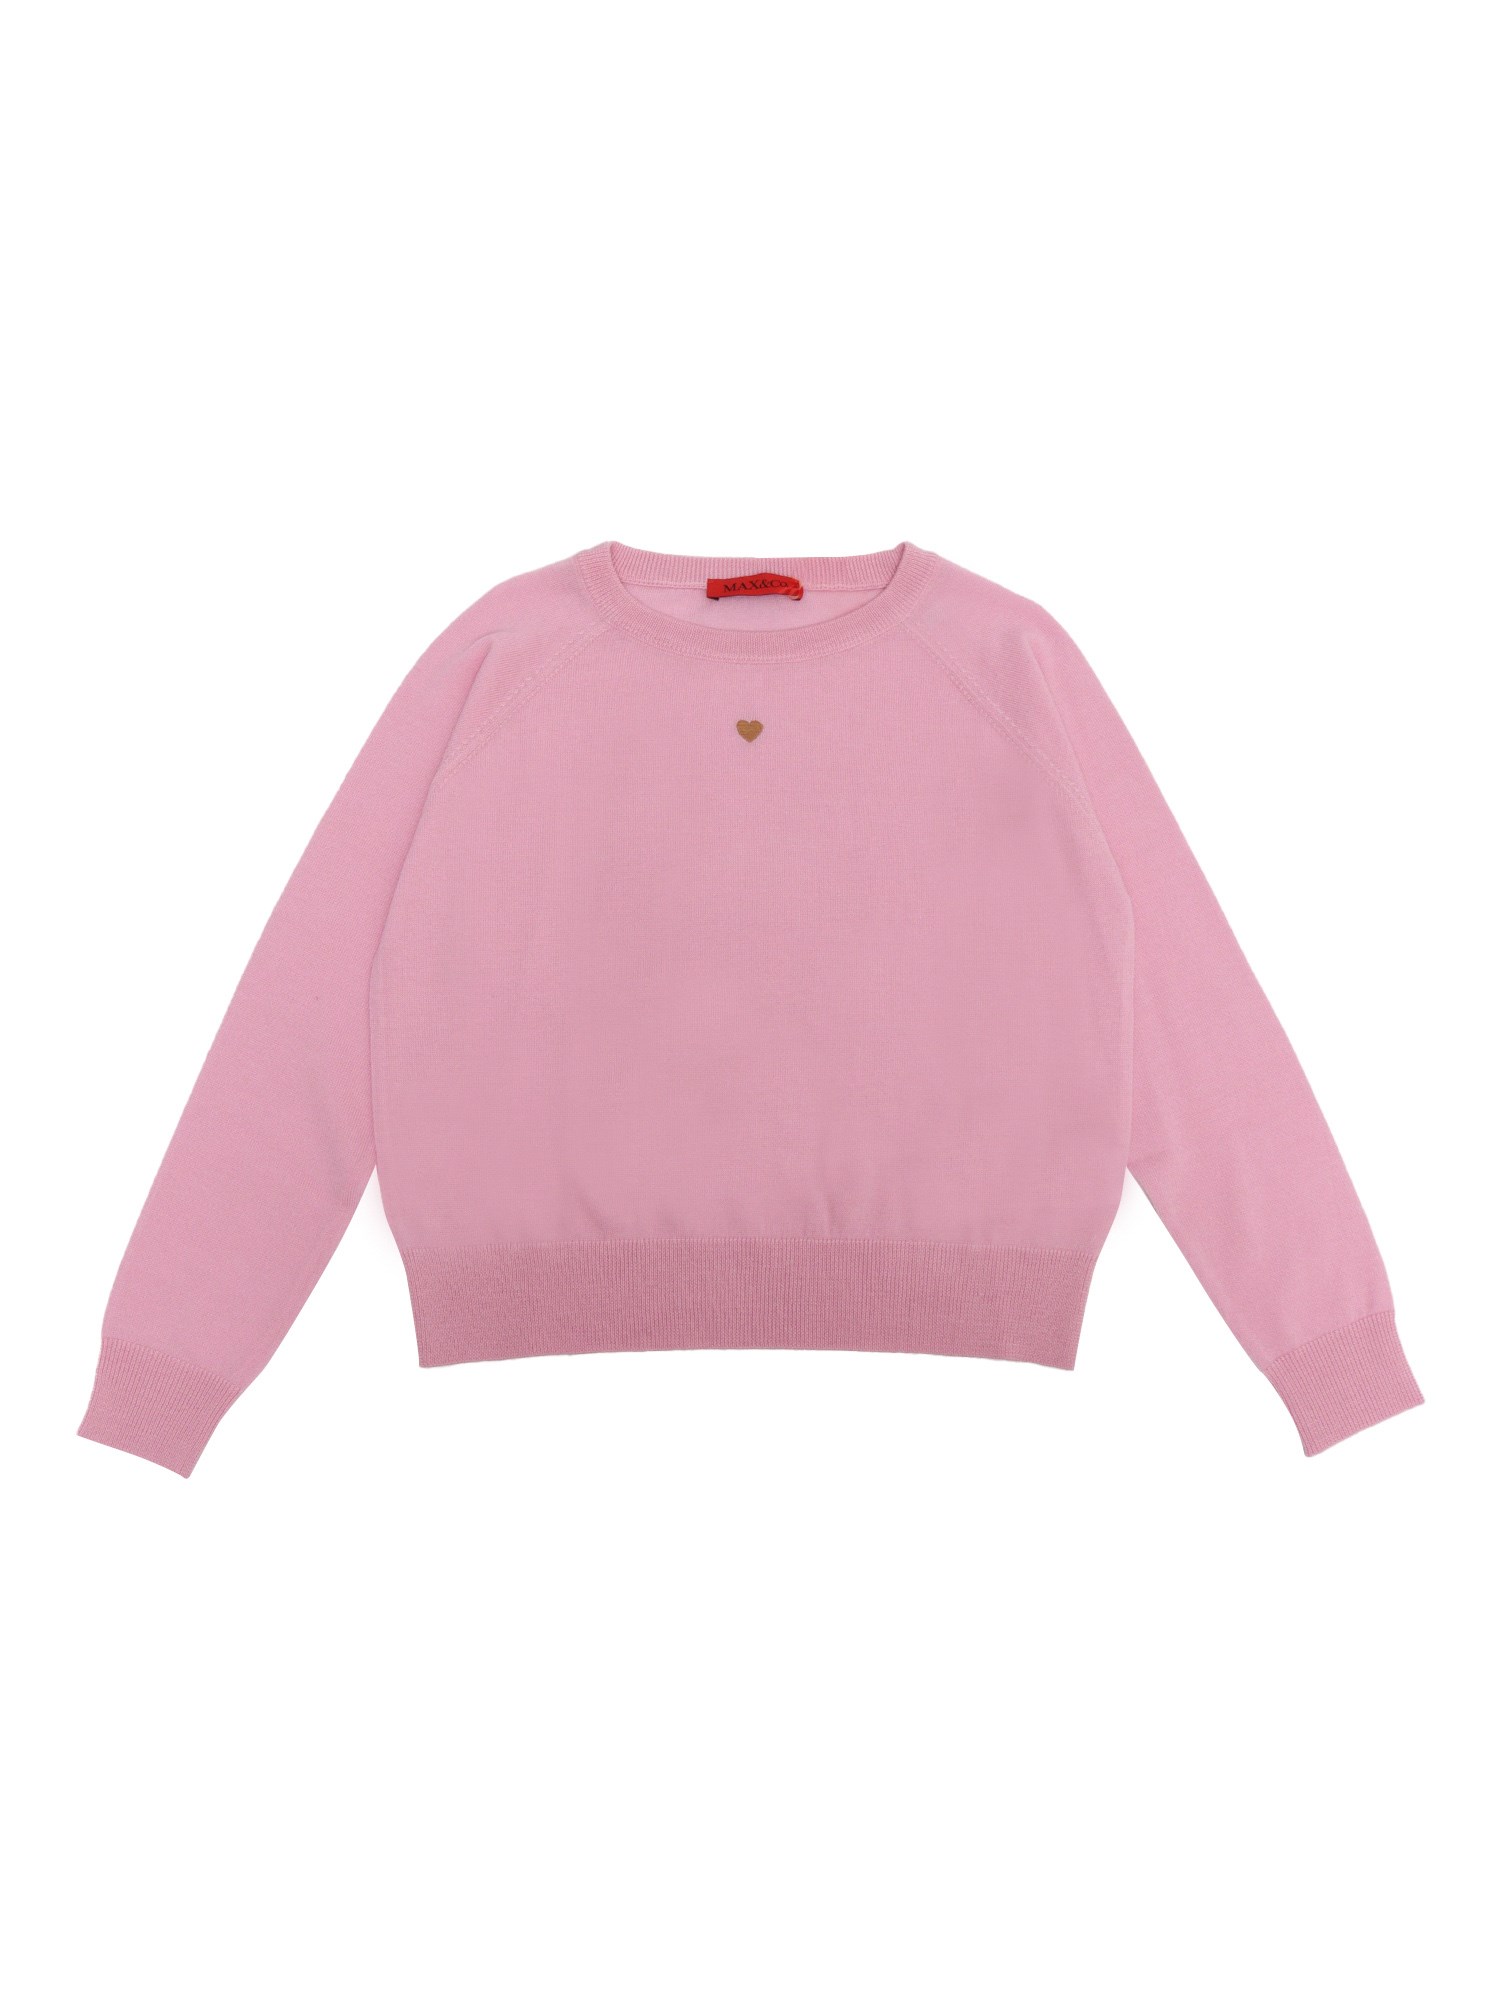 Max & Co Pink Sweater